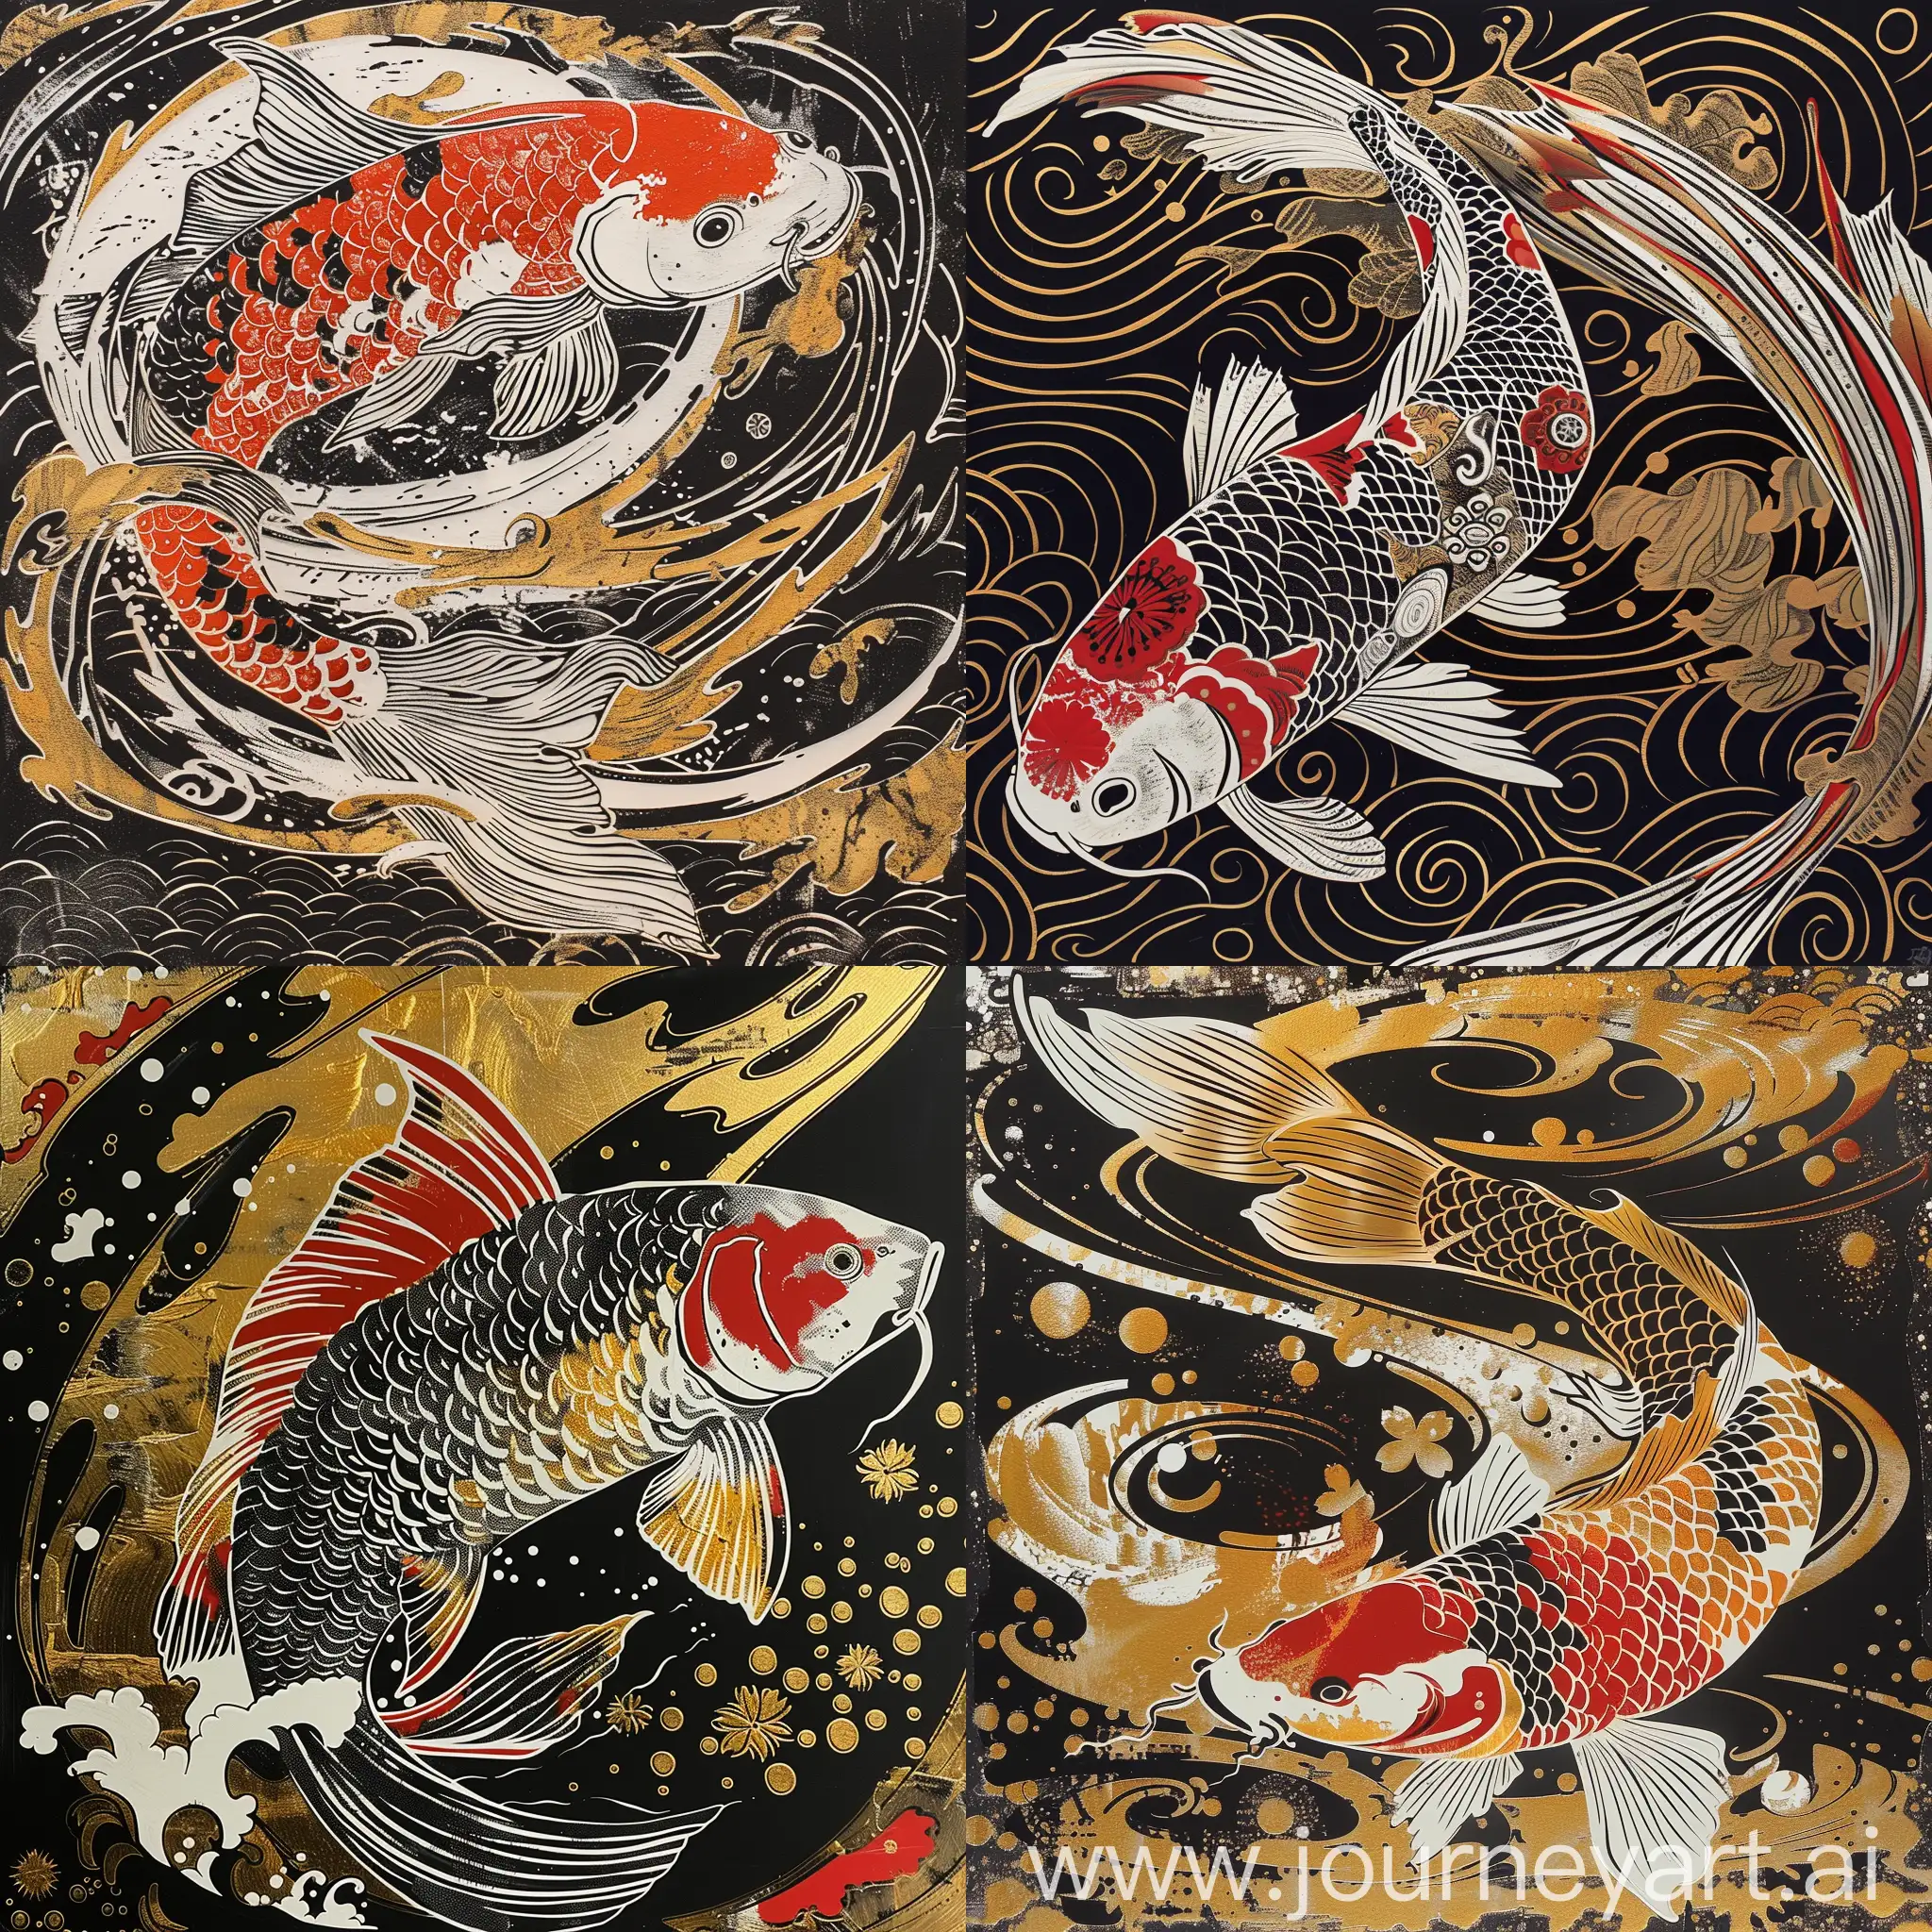 Japanese butterfly koi linocut print with ornate patterns and fine line textures, dynamic composition, black, gold, white, red